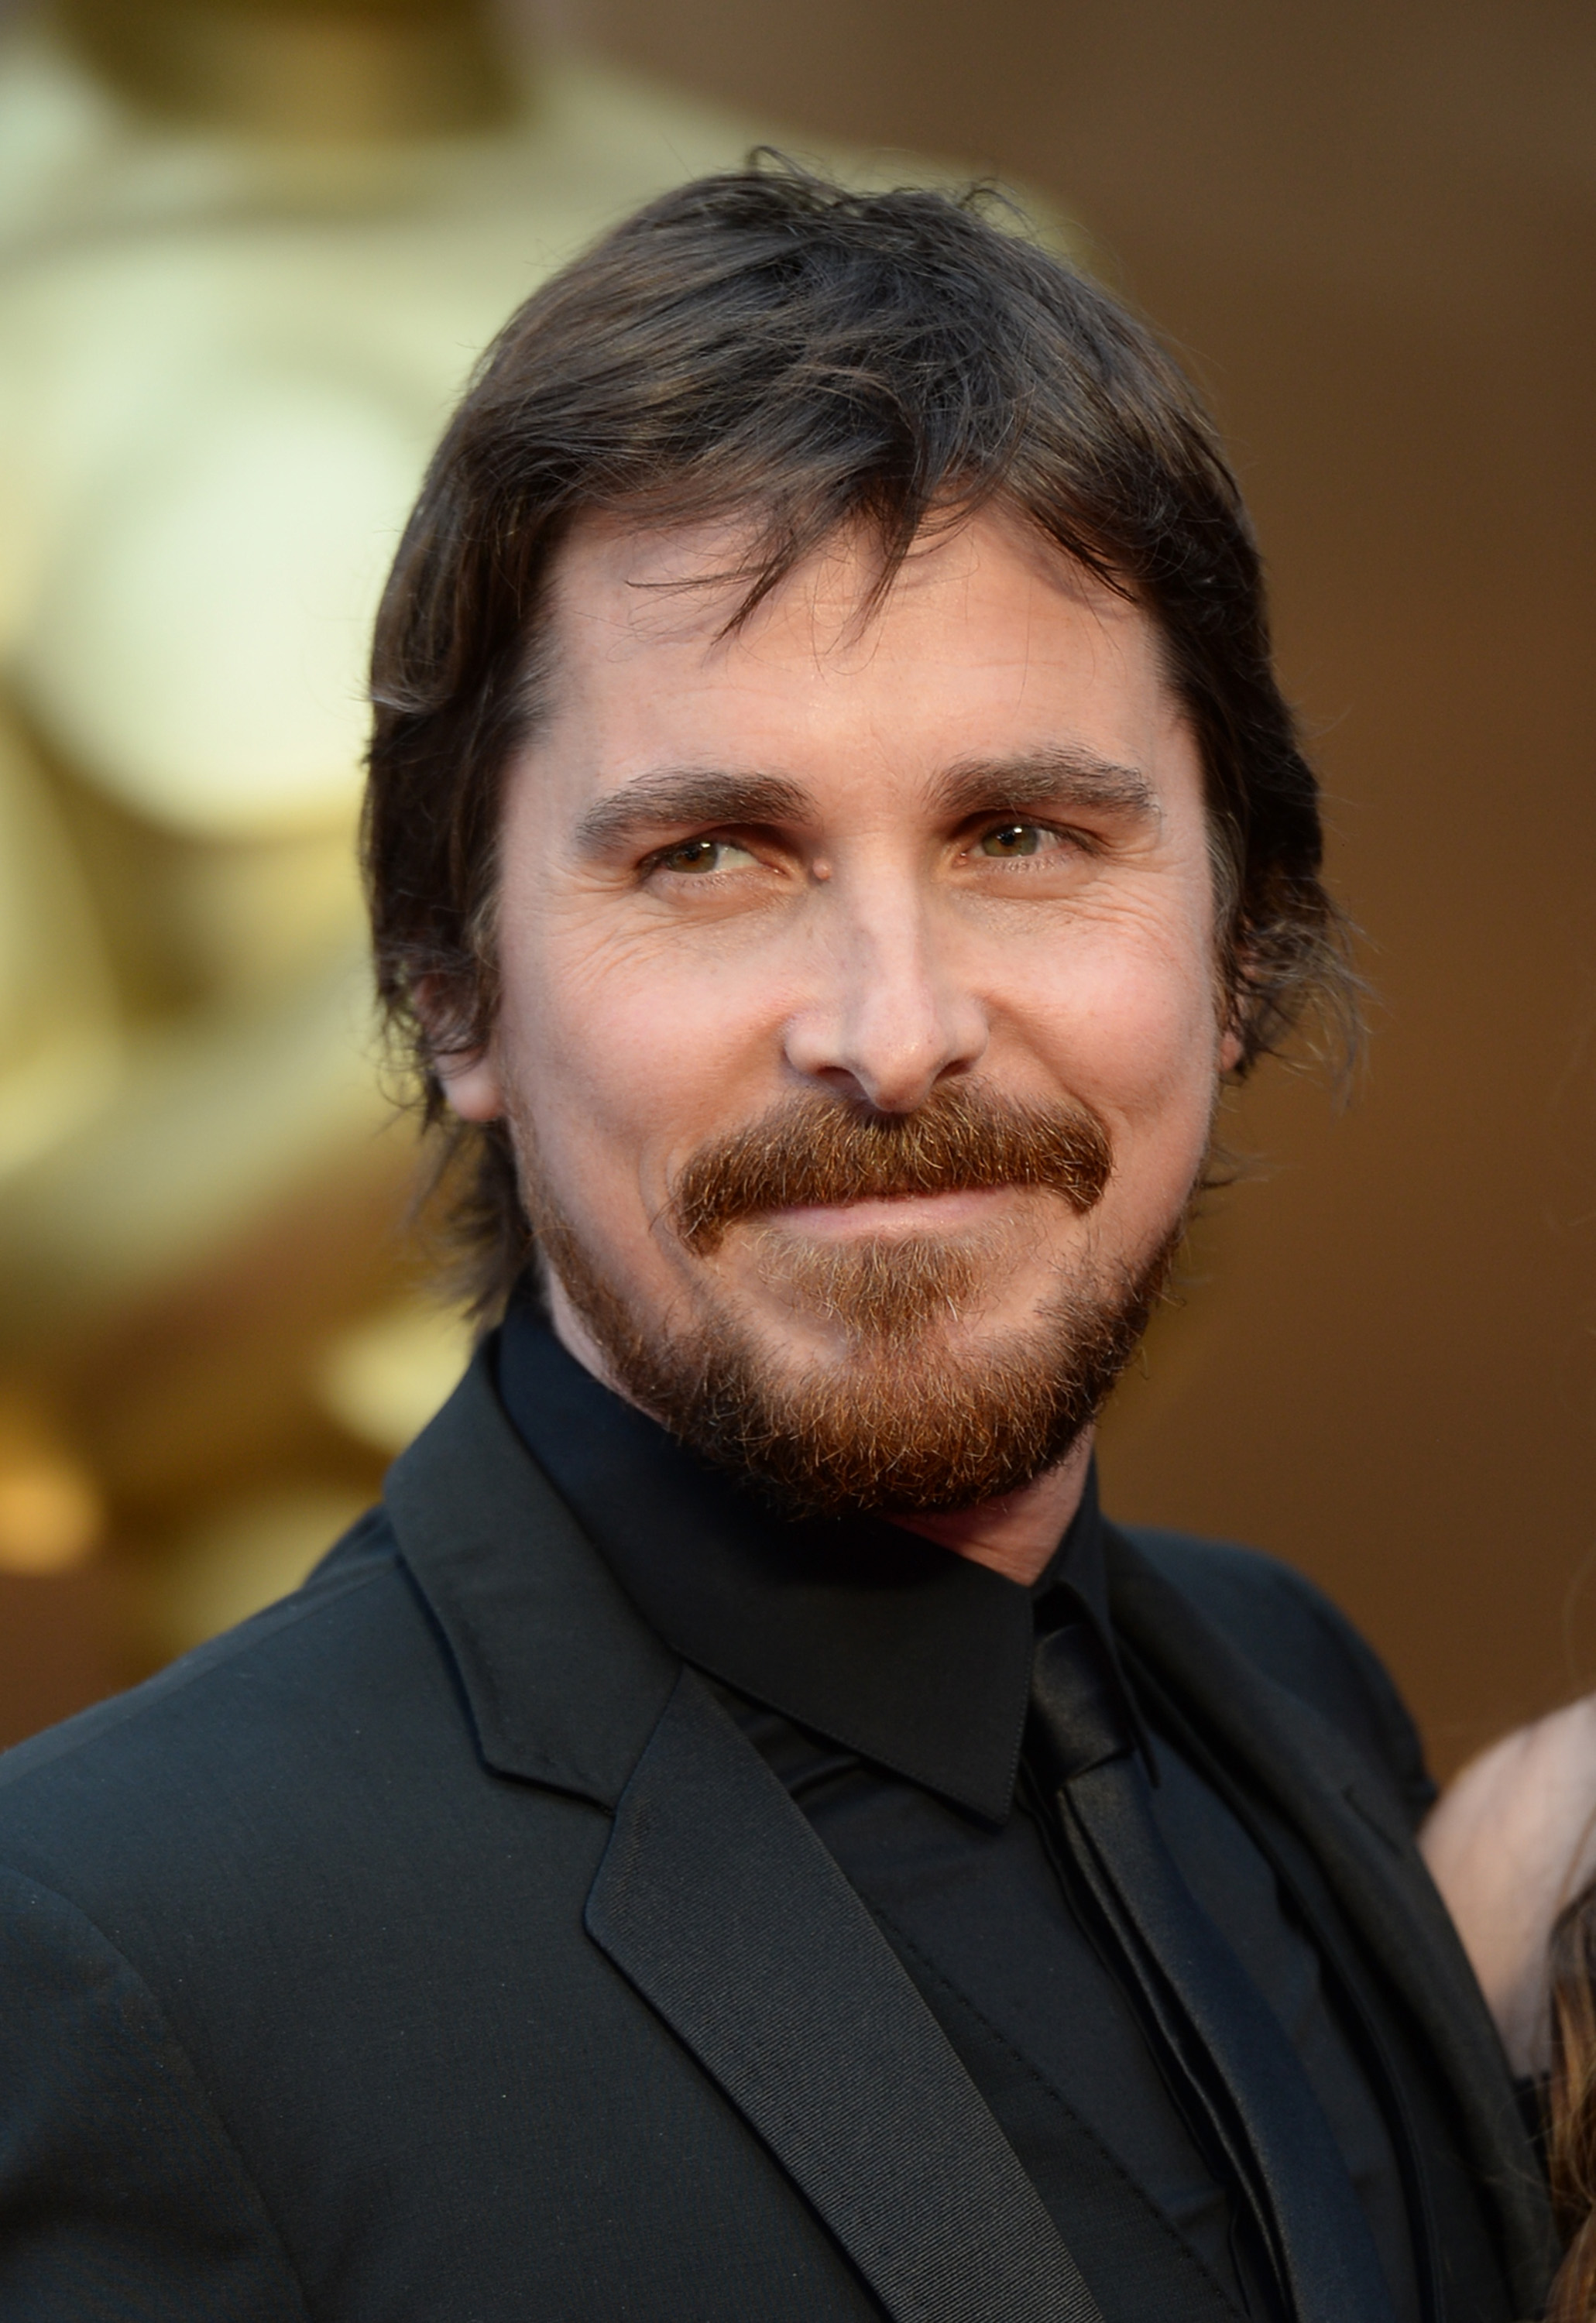 Actor Christian Bale attends the Oscars held at Hollywood and Highland Center on March 2, 2014 in Hollywood. (Jason Merritt—Getty Images)